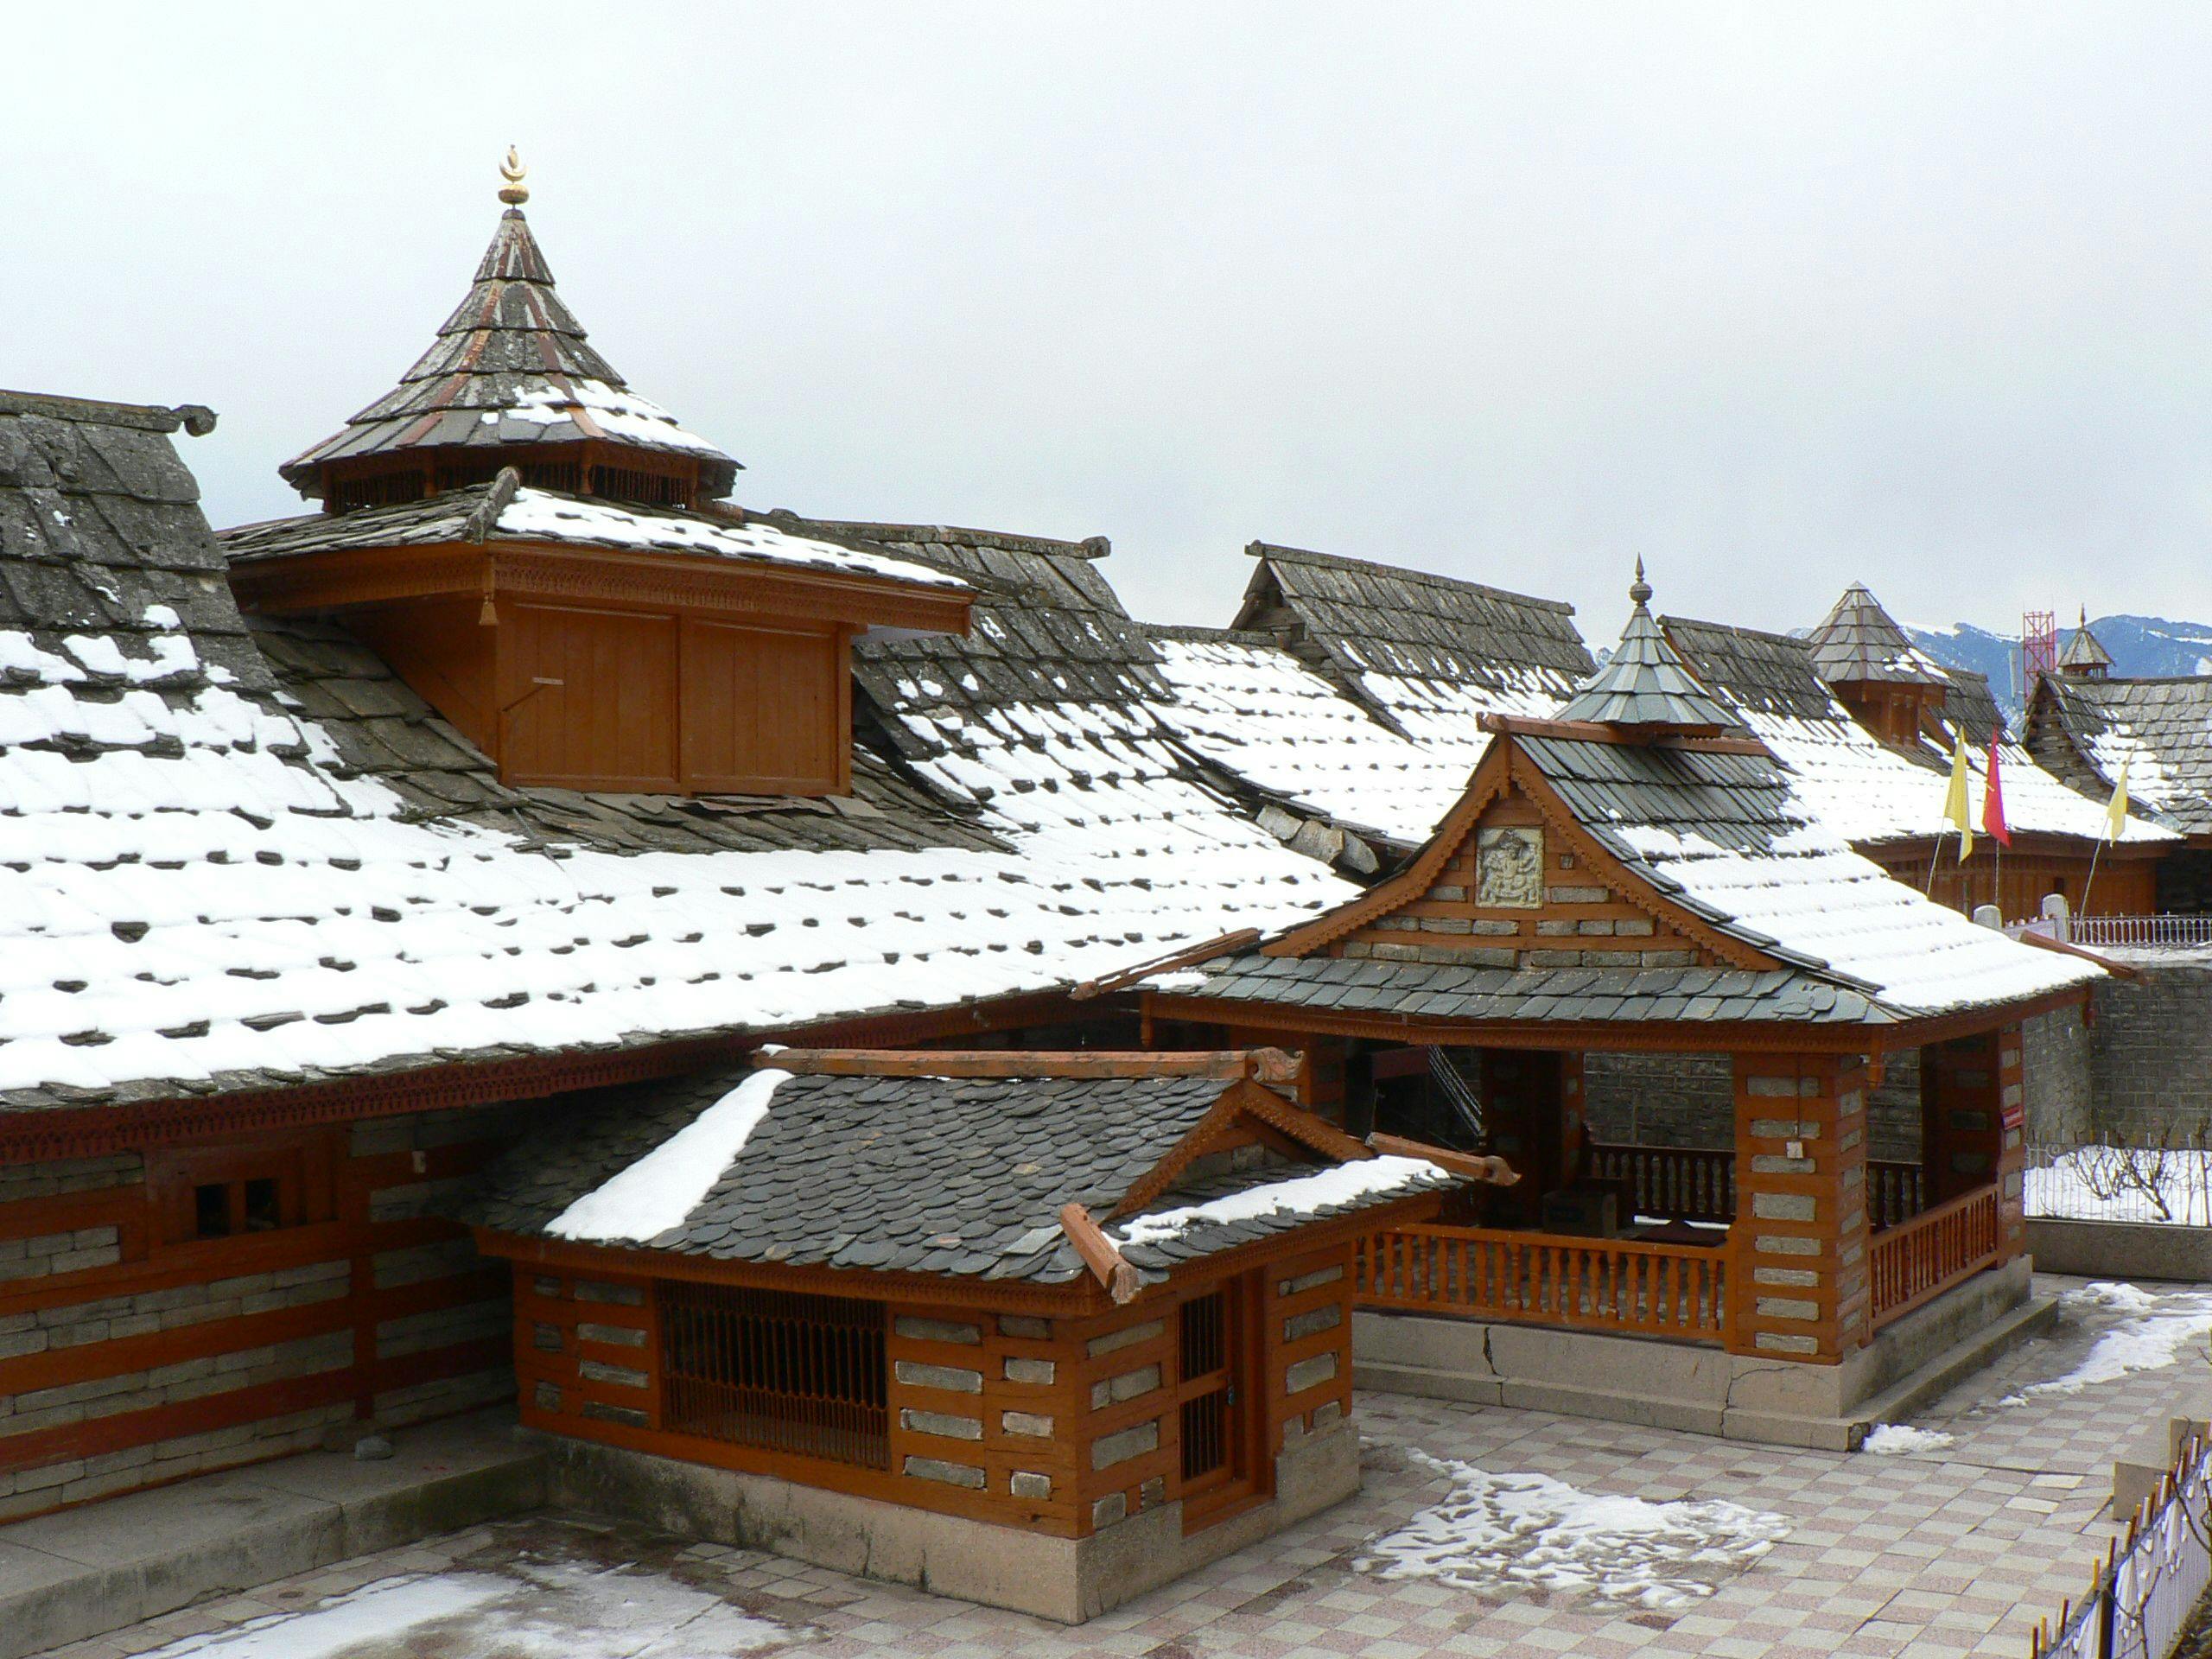 Intriguing skyline of the roofs in the temple complex